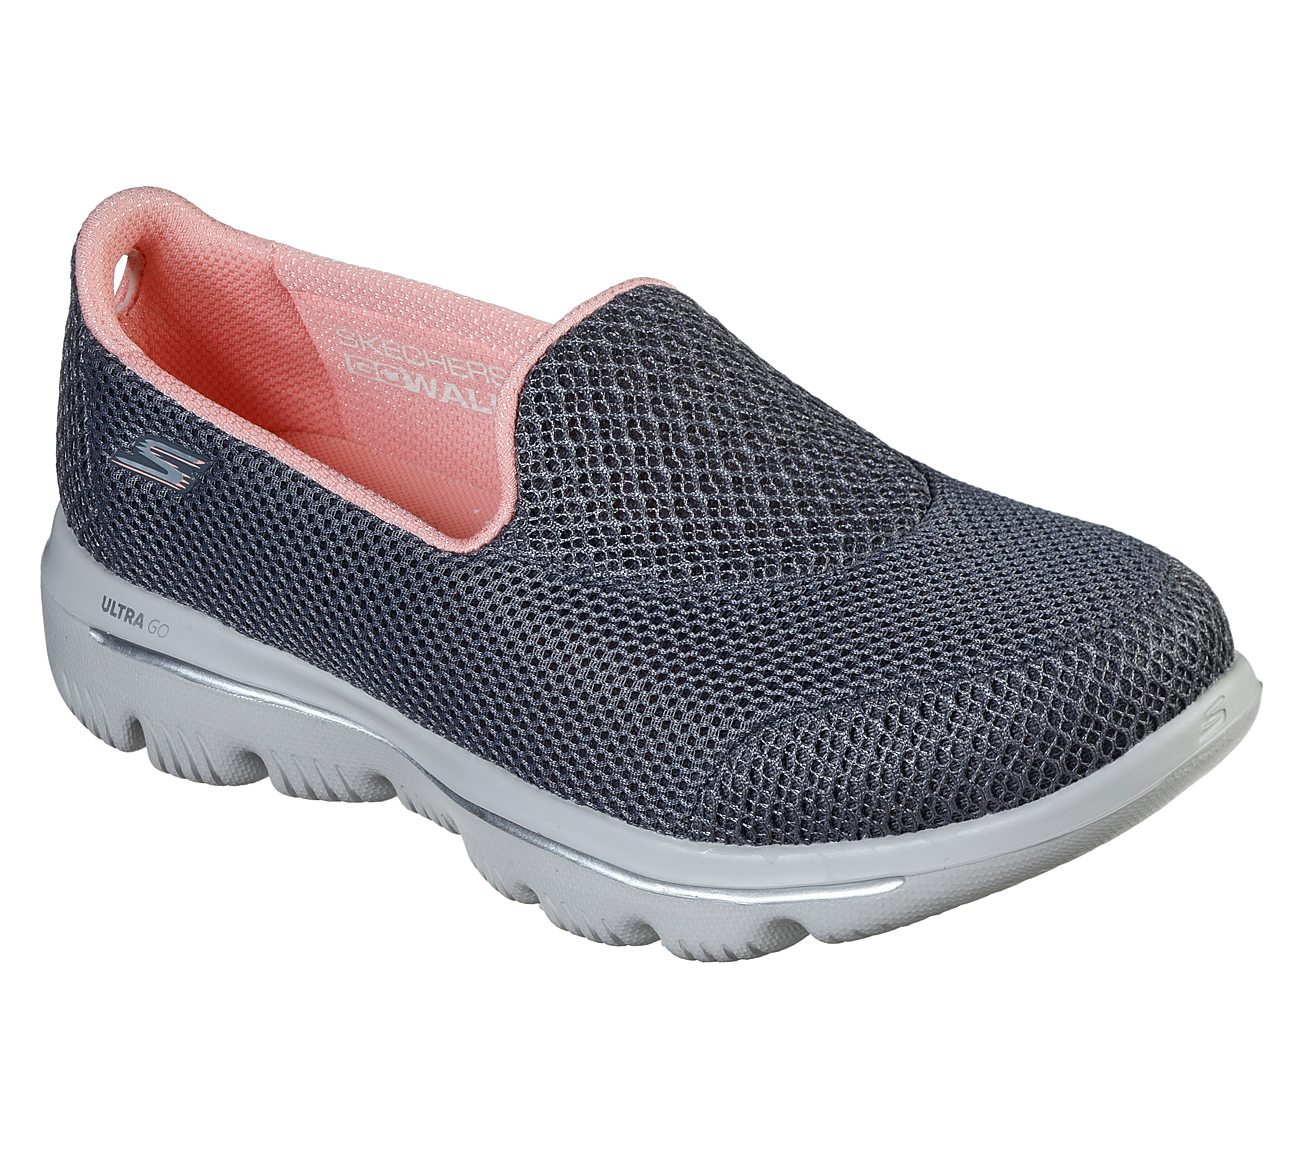 GO WALK EVOLUTION ULTRA-INTER, CCHARCOAL Footwear Lateral View